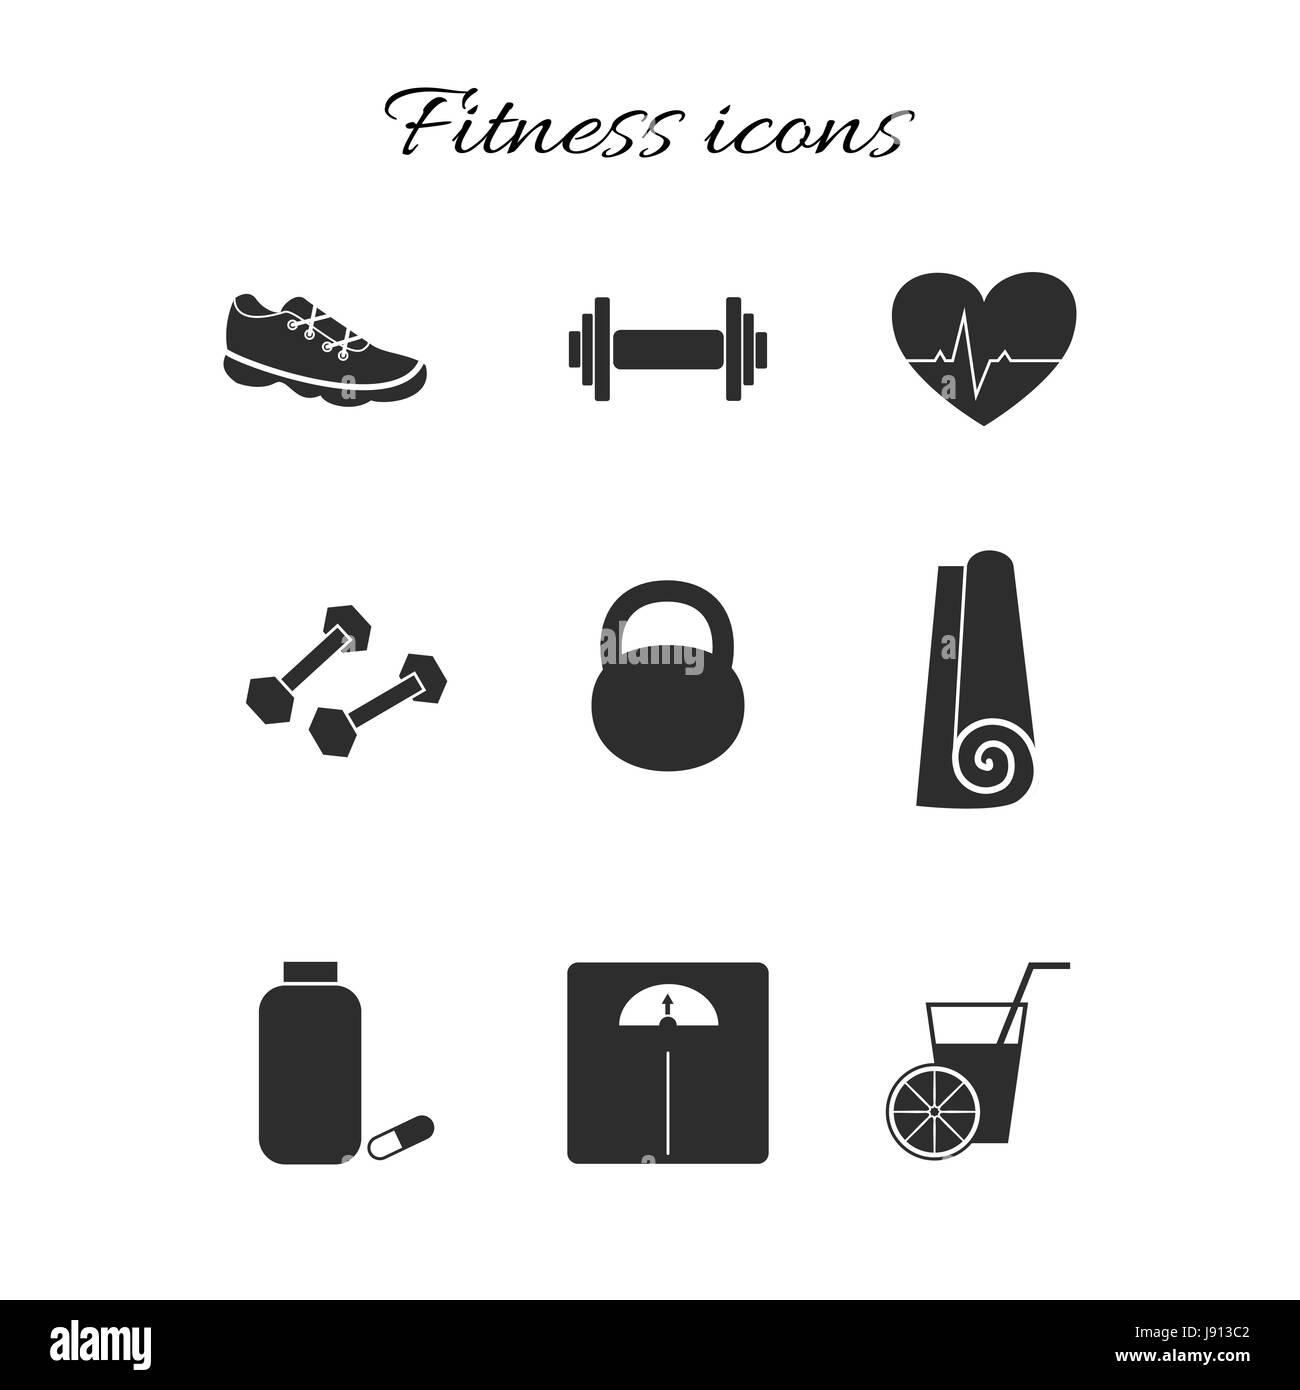 Healhty fitness icon. Flat sport pictogram for web. Line stroke. Simple gym  and diet symbols in stack isolated on white background. Outline icon vecto  Stock Photo - Alamy